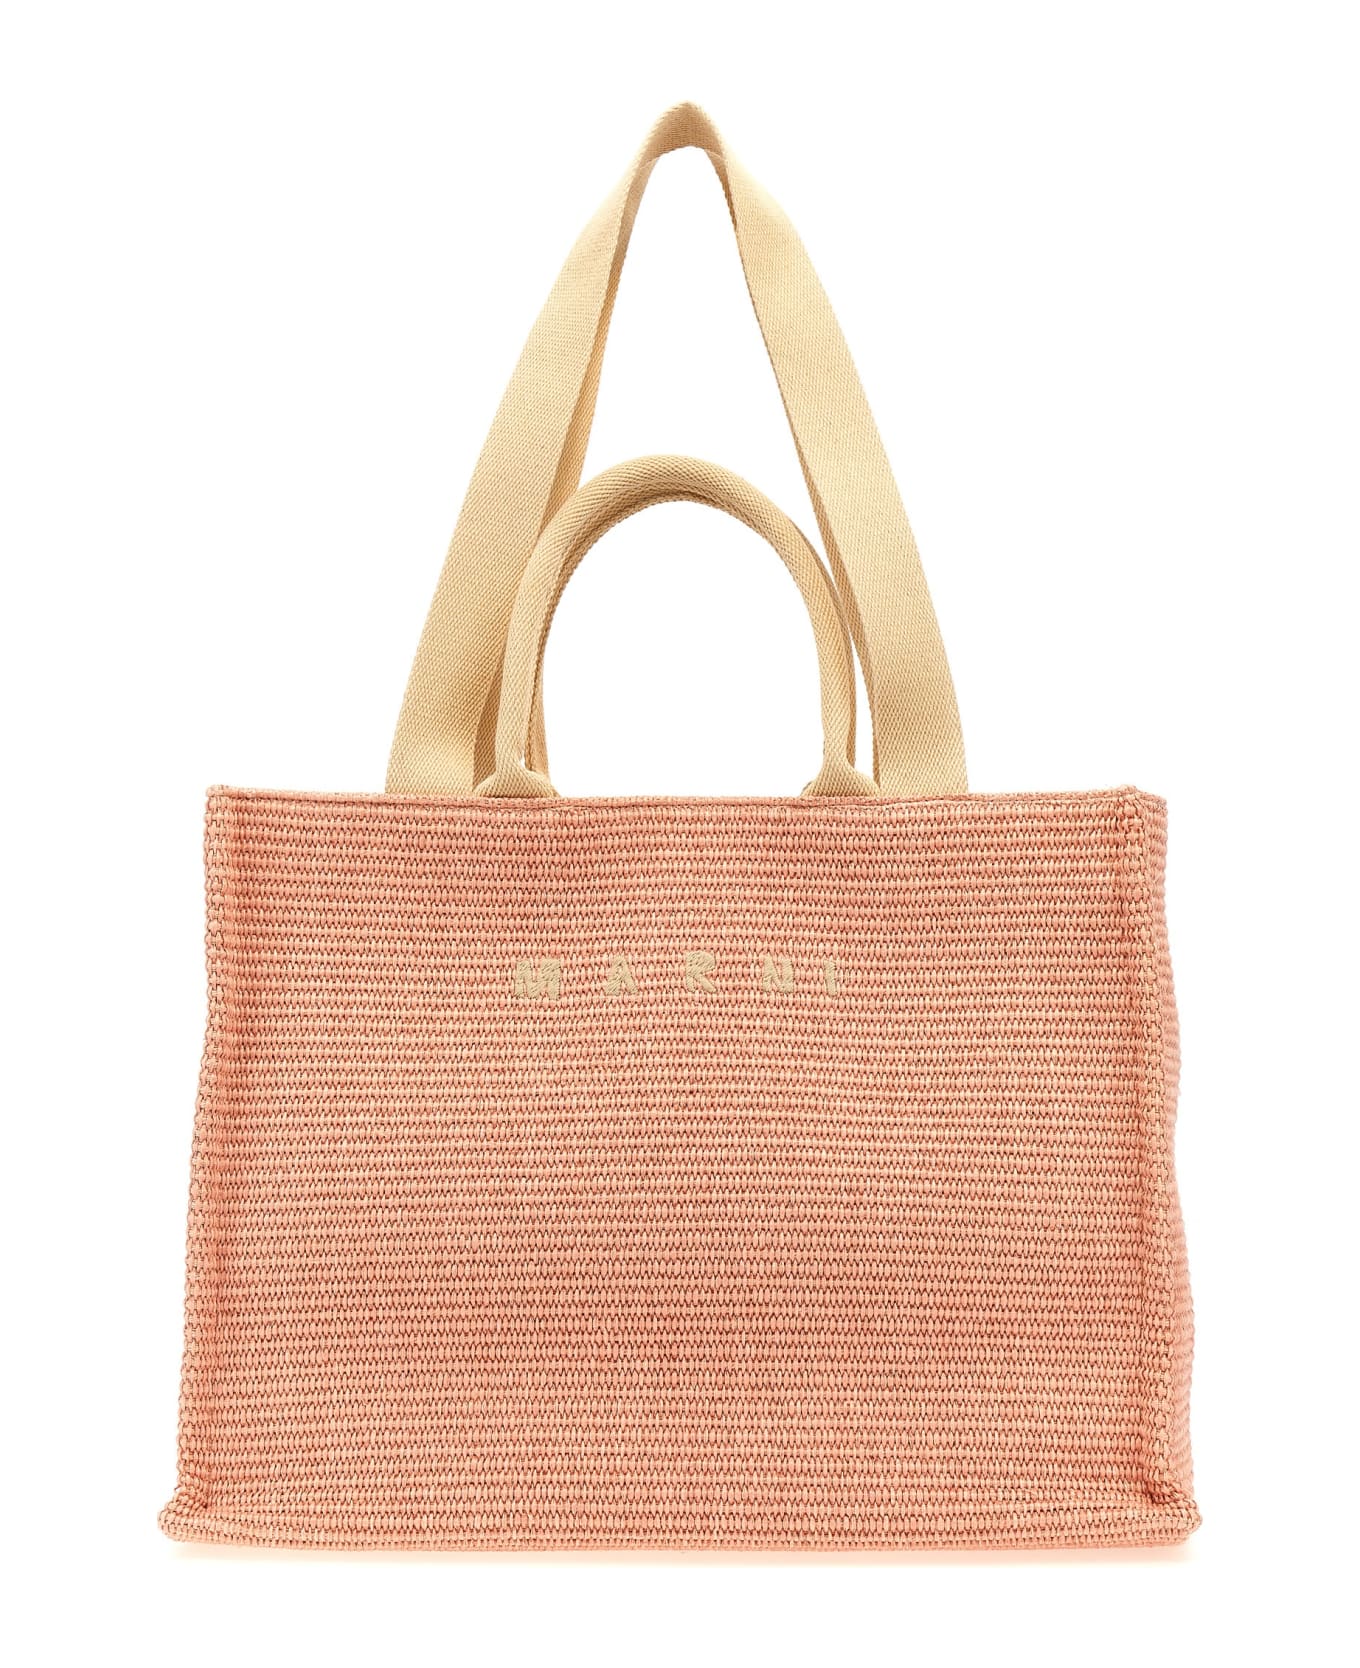 Marni 'east/west' Large Shopping Bag - Pink トートバッグ